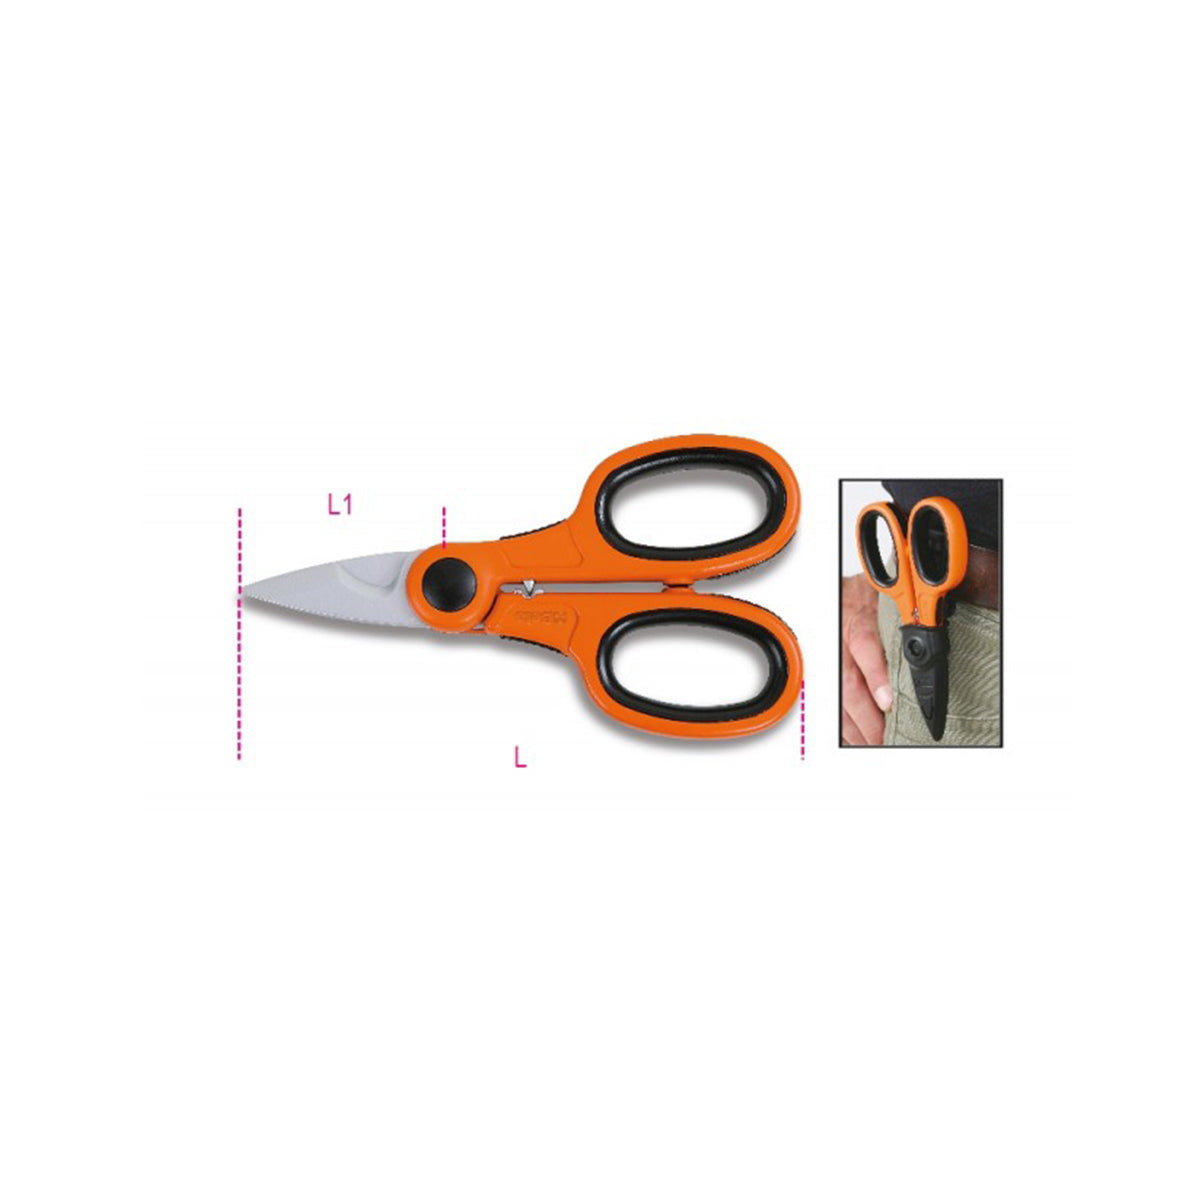 Electricians scissors with crimping pliers for tube terminals - Beta 1128BCX